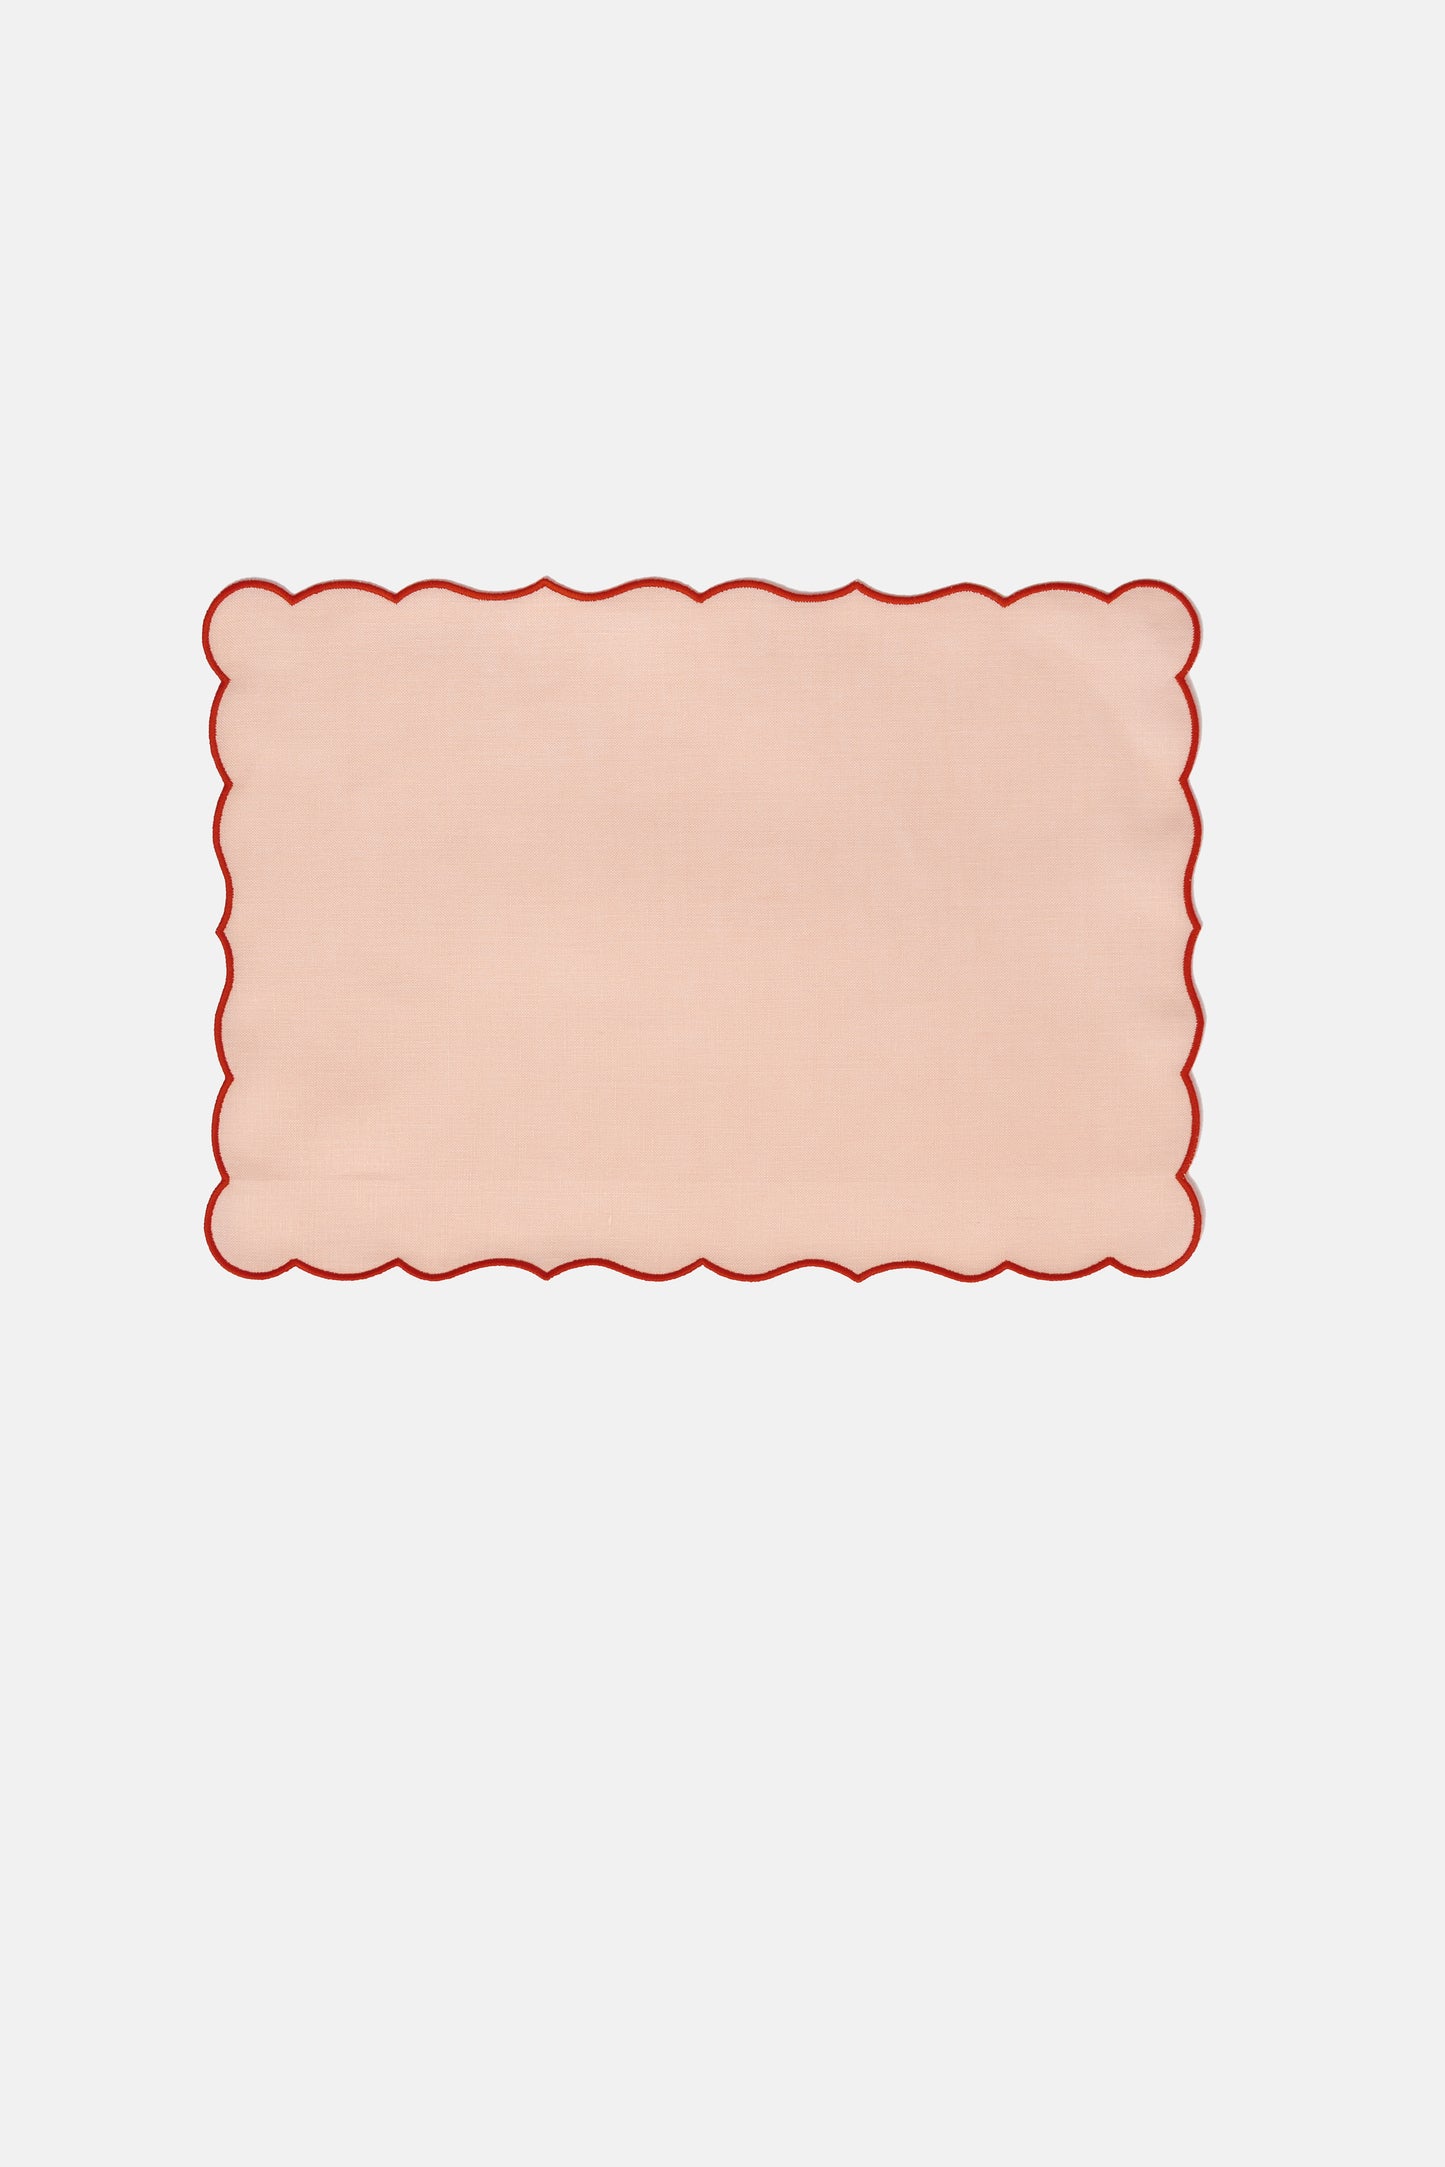 "Lido" placemat in Pink / Red